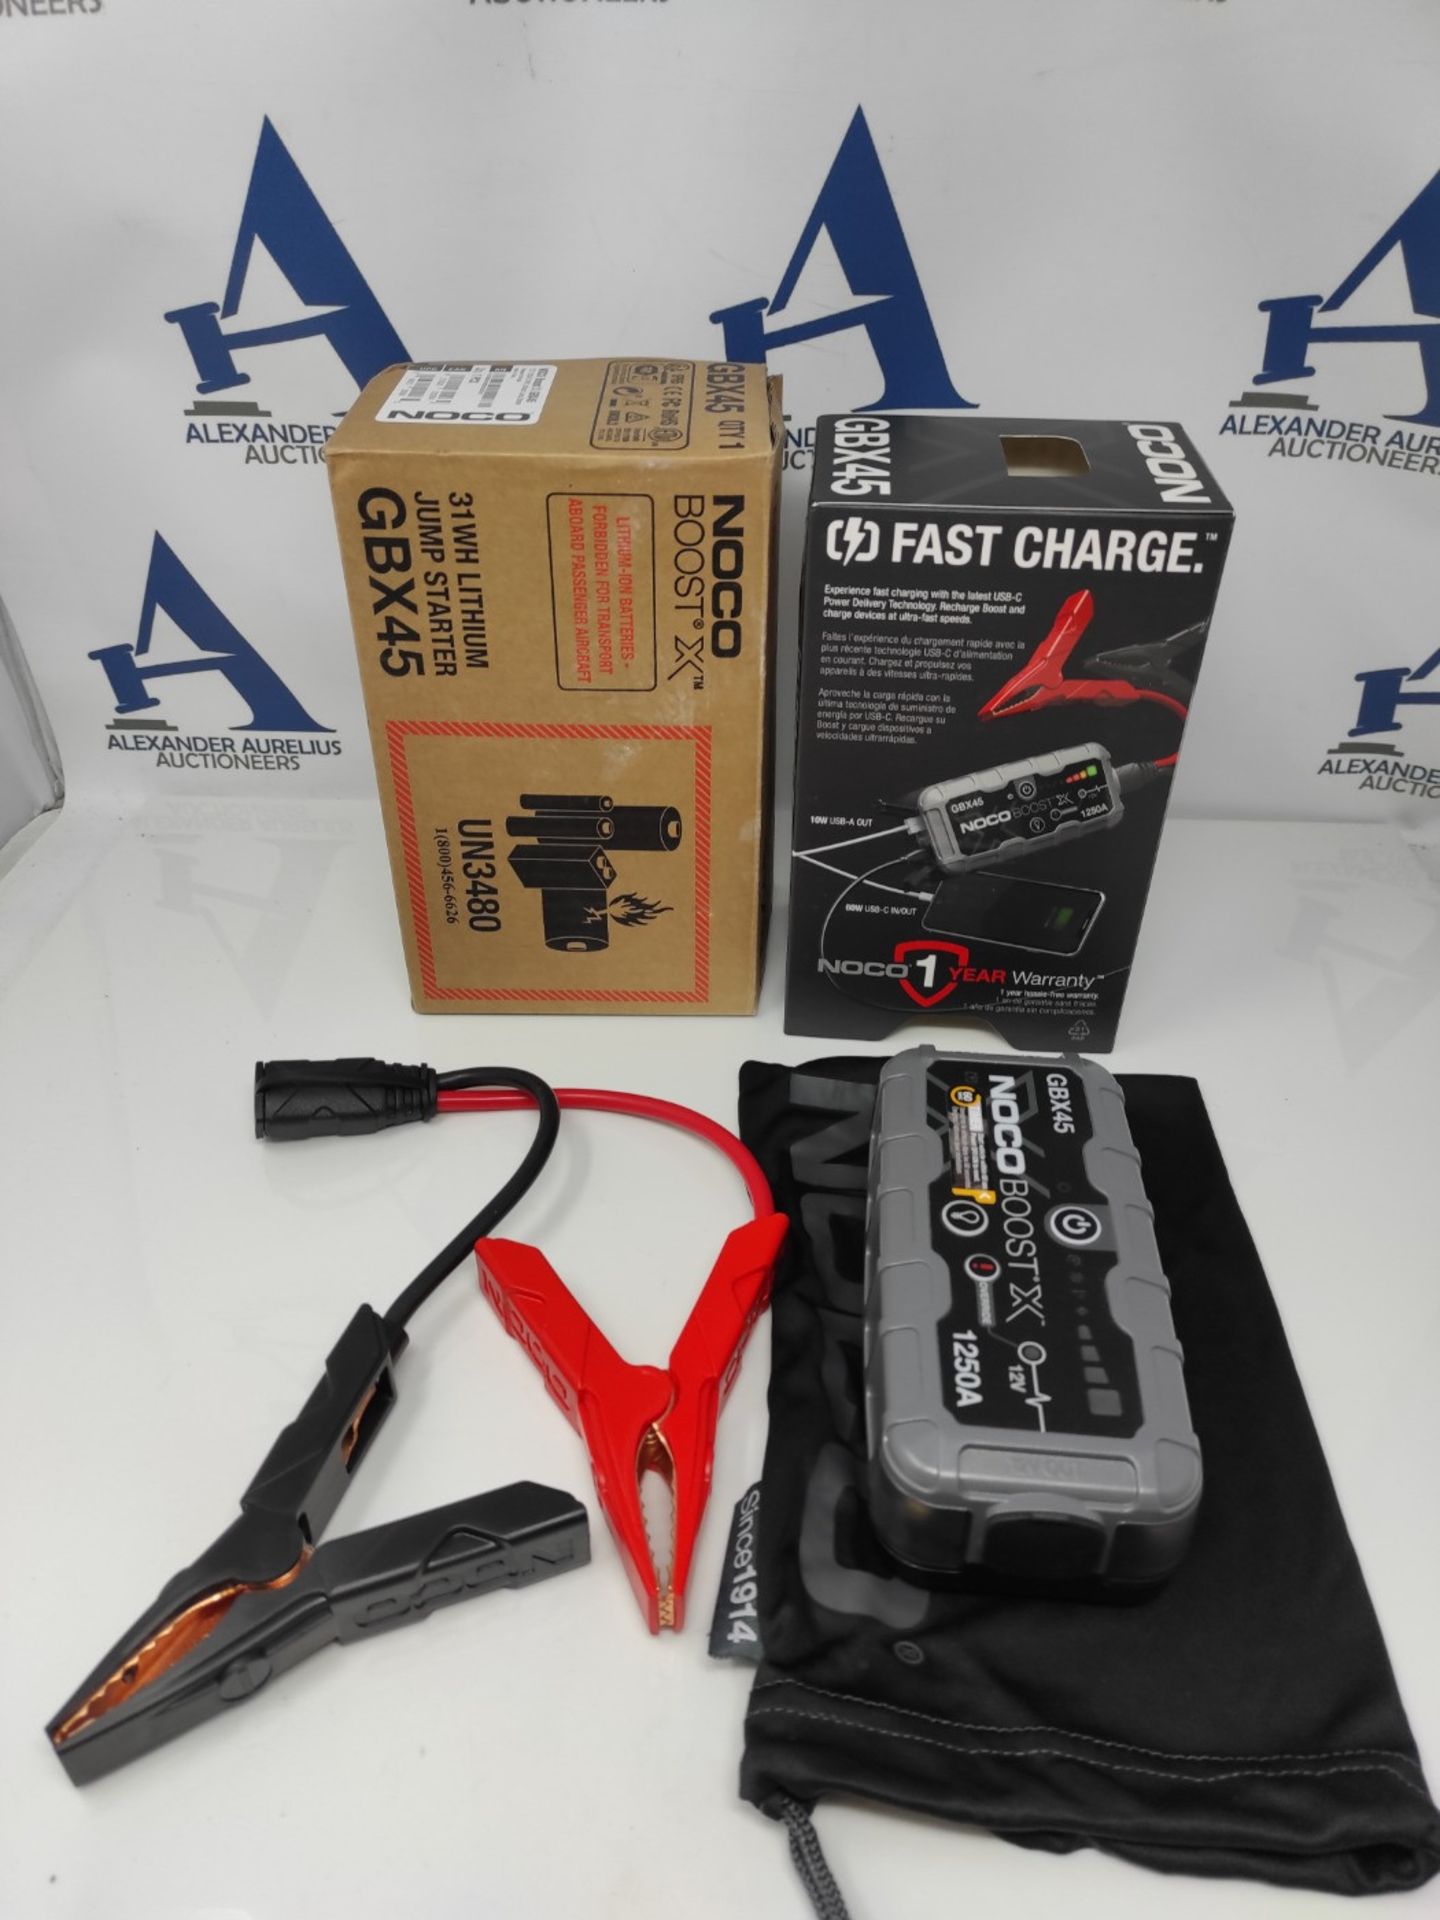 RRP £121.00 NOCO Boost X GBX45 1250A 12V UltraSafe Portable Lithium Car Jump Starter, Heavy-Duty B - Image 2 of 2